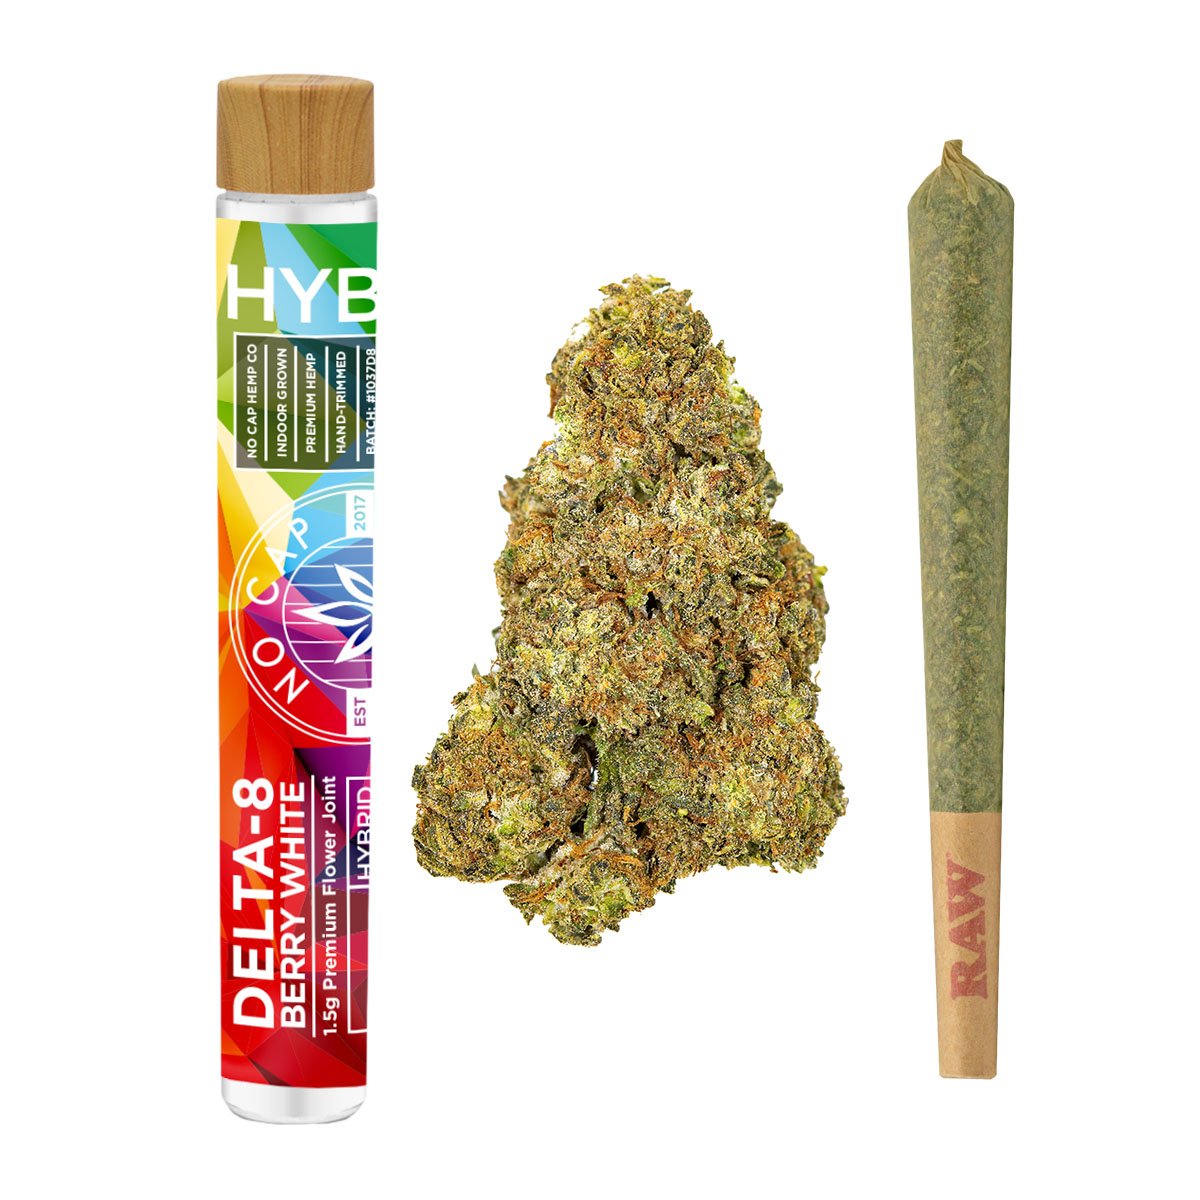 No Cap Hemp Co Delta 8 THC Preroll Berry White yoga smokes yoga studio, delivery, delivery near me, yoga smokes smoke shop, find smoke shop, head shop near me, yoga studio, headshop, head shop, local smoke shop, psl, psl smoke shop, smoke shop, smokeshop, yoga, yoga studio, dispensary, local dispensary, smokeshop near me, port saint lucie, florida, port st lucie, lounge, life, highlife, love, stoned, highsociety. Yoga Smokes